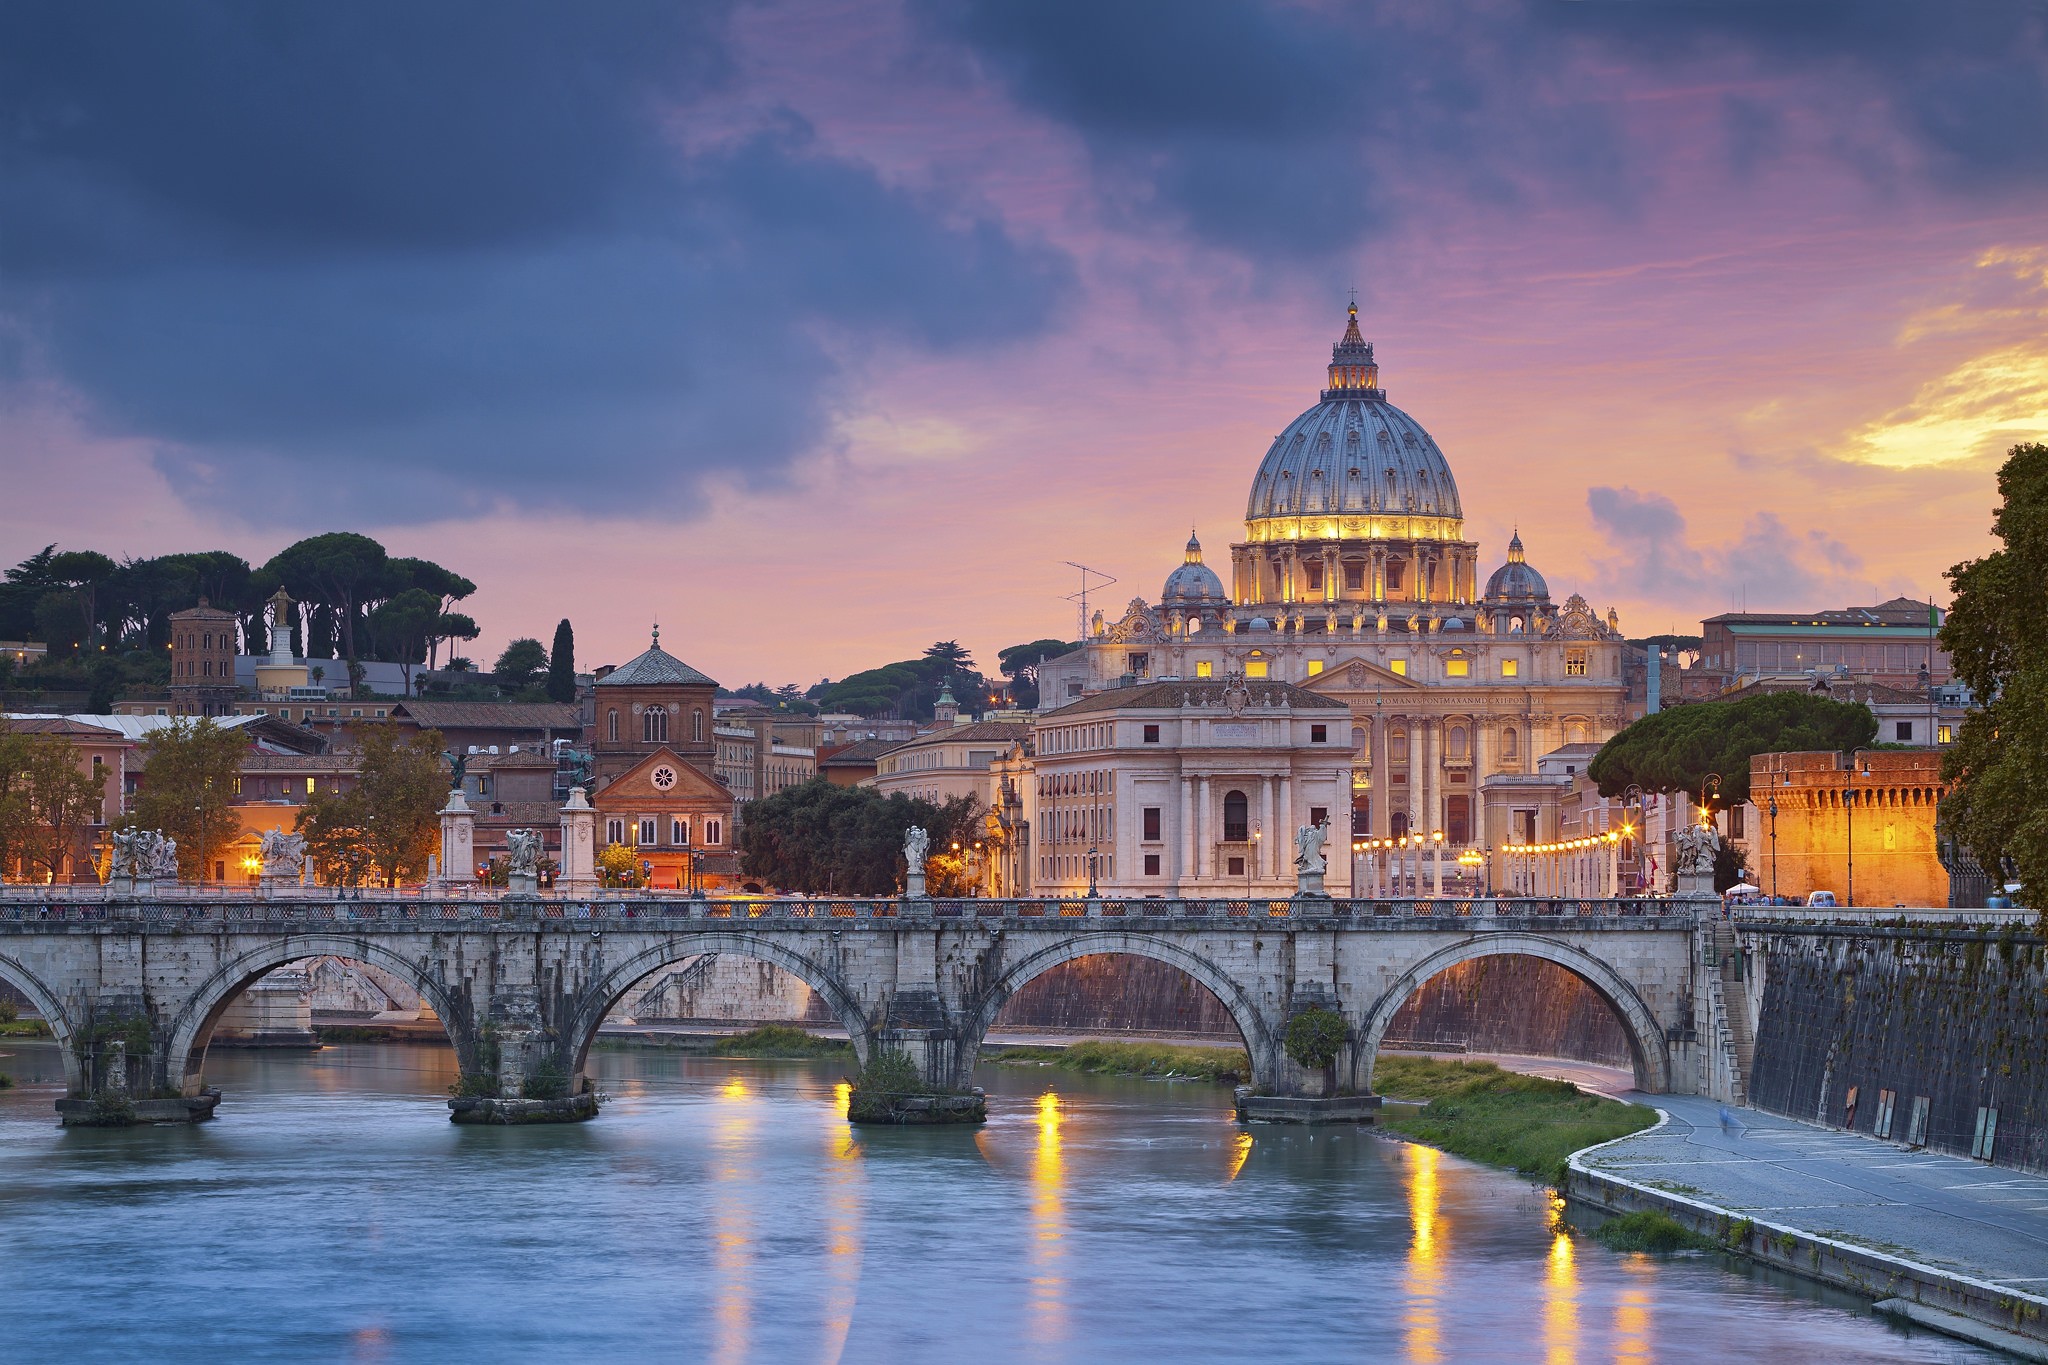 Rome, Italy, Vatican City, Cathedral, Church, River, Bridge, Evening, Lights, Sky, Clouds, Building, Old building, Trees, City, Urban, Cityscape Wallpaper